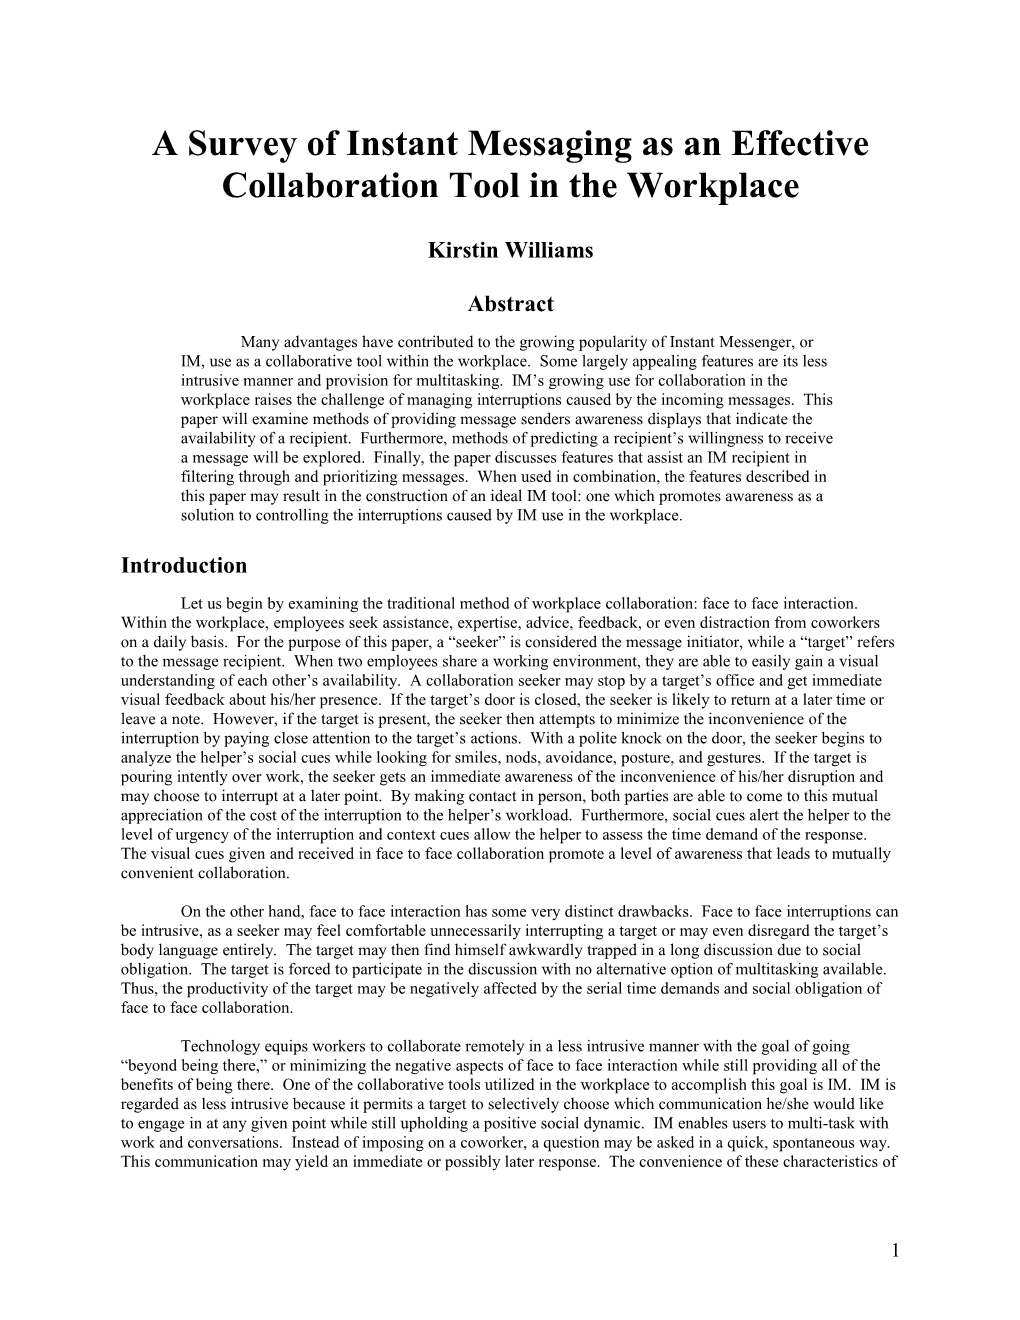 A Survey of Instant Messaging As an Effective Collaboration Tool in the Workplace